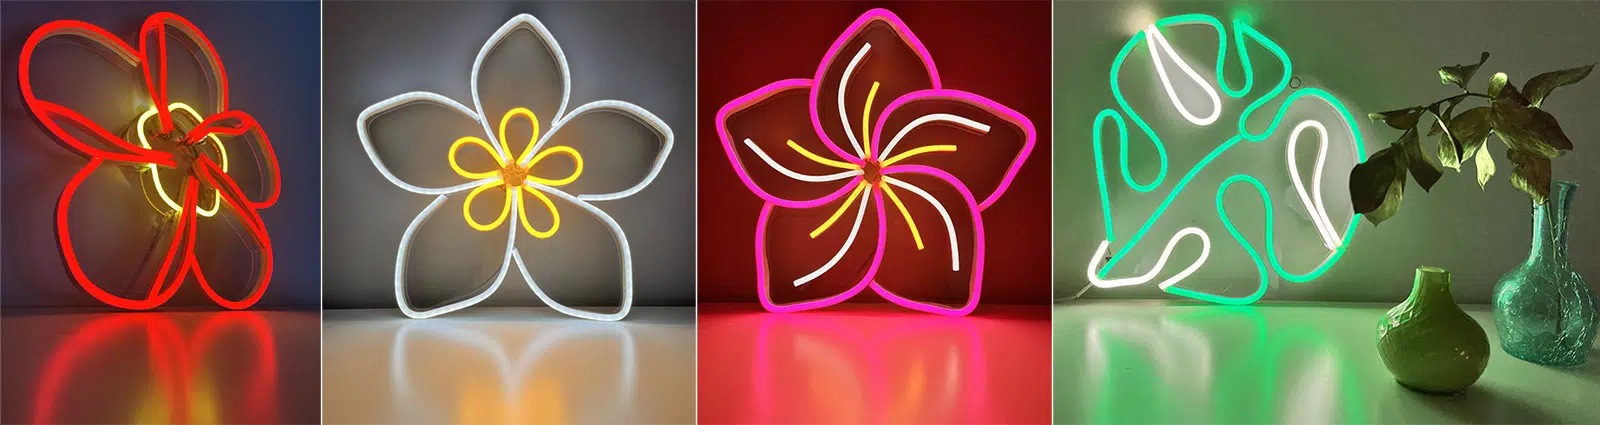 Floral tropical neon LED signs wall art decor